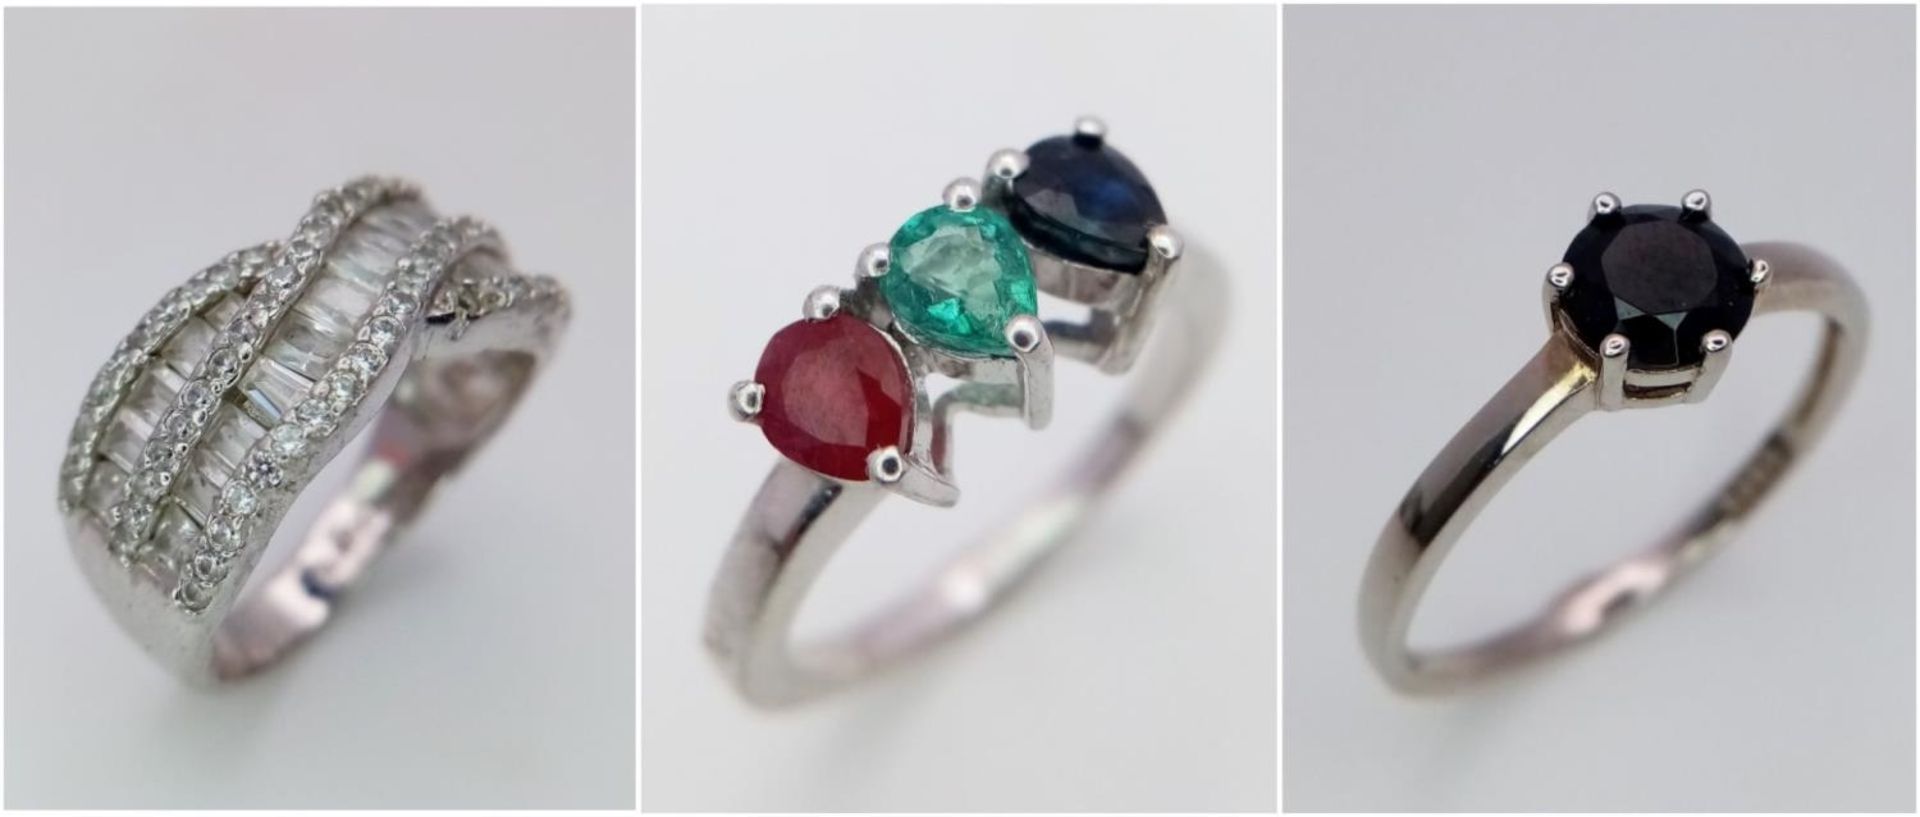 Three 925 Silver Different Style Stone Set Rings. Sizes: 2 X N and V. - Image 2 of 4